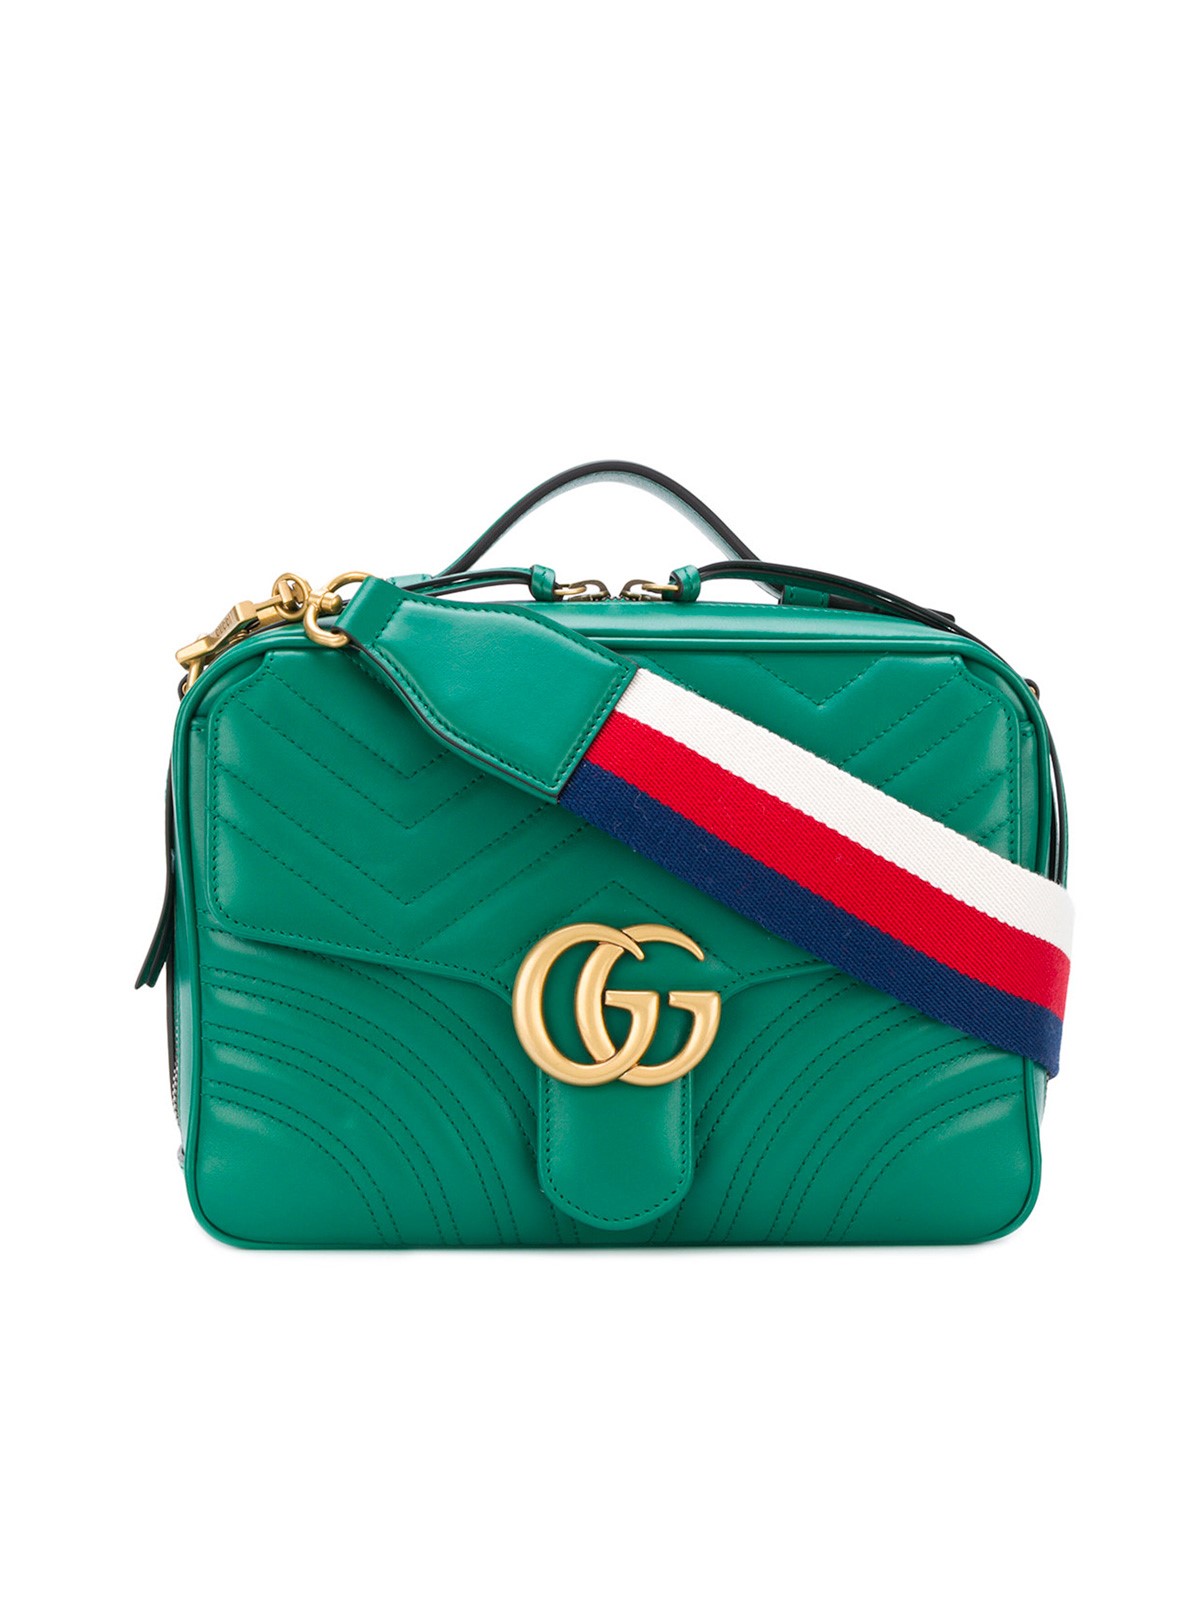 gucci GG MARMONT SHOULDER BAG available on www.neverfullbag.com - 21477